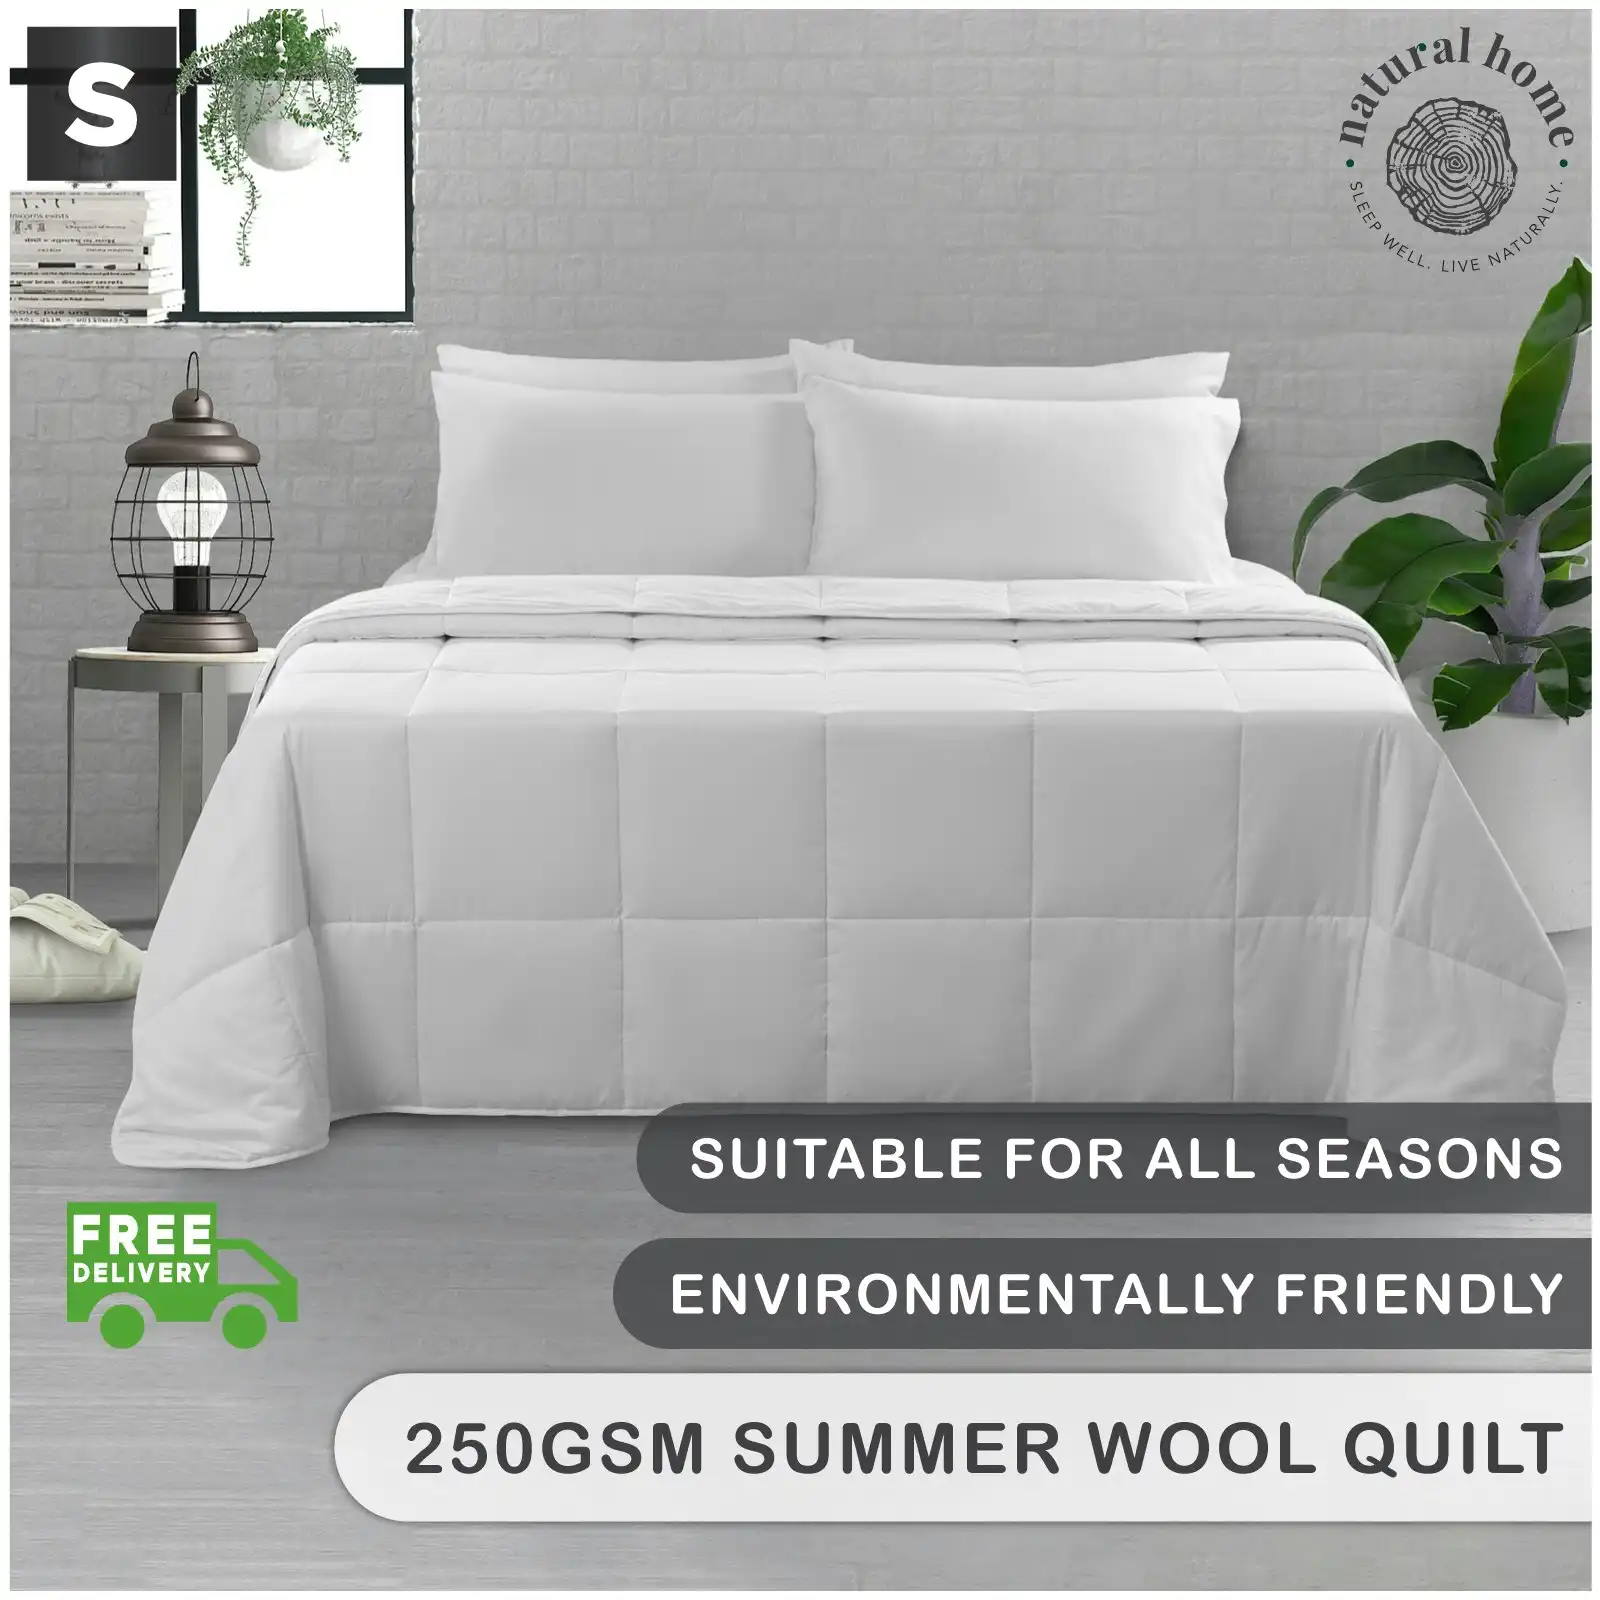 Natural Home Summer Wool Quilt 250gsm - White - Single Bed